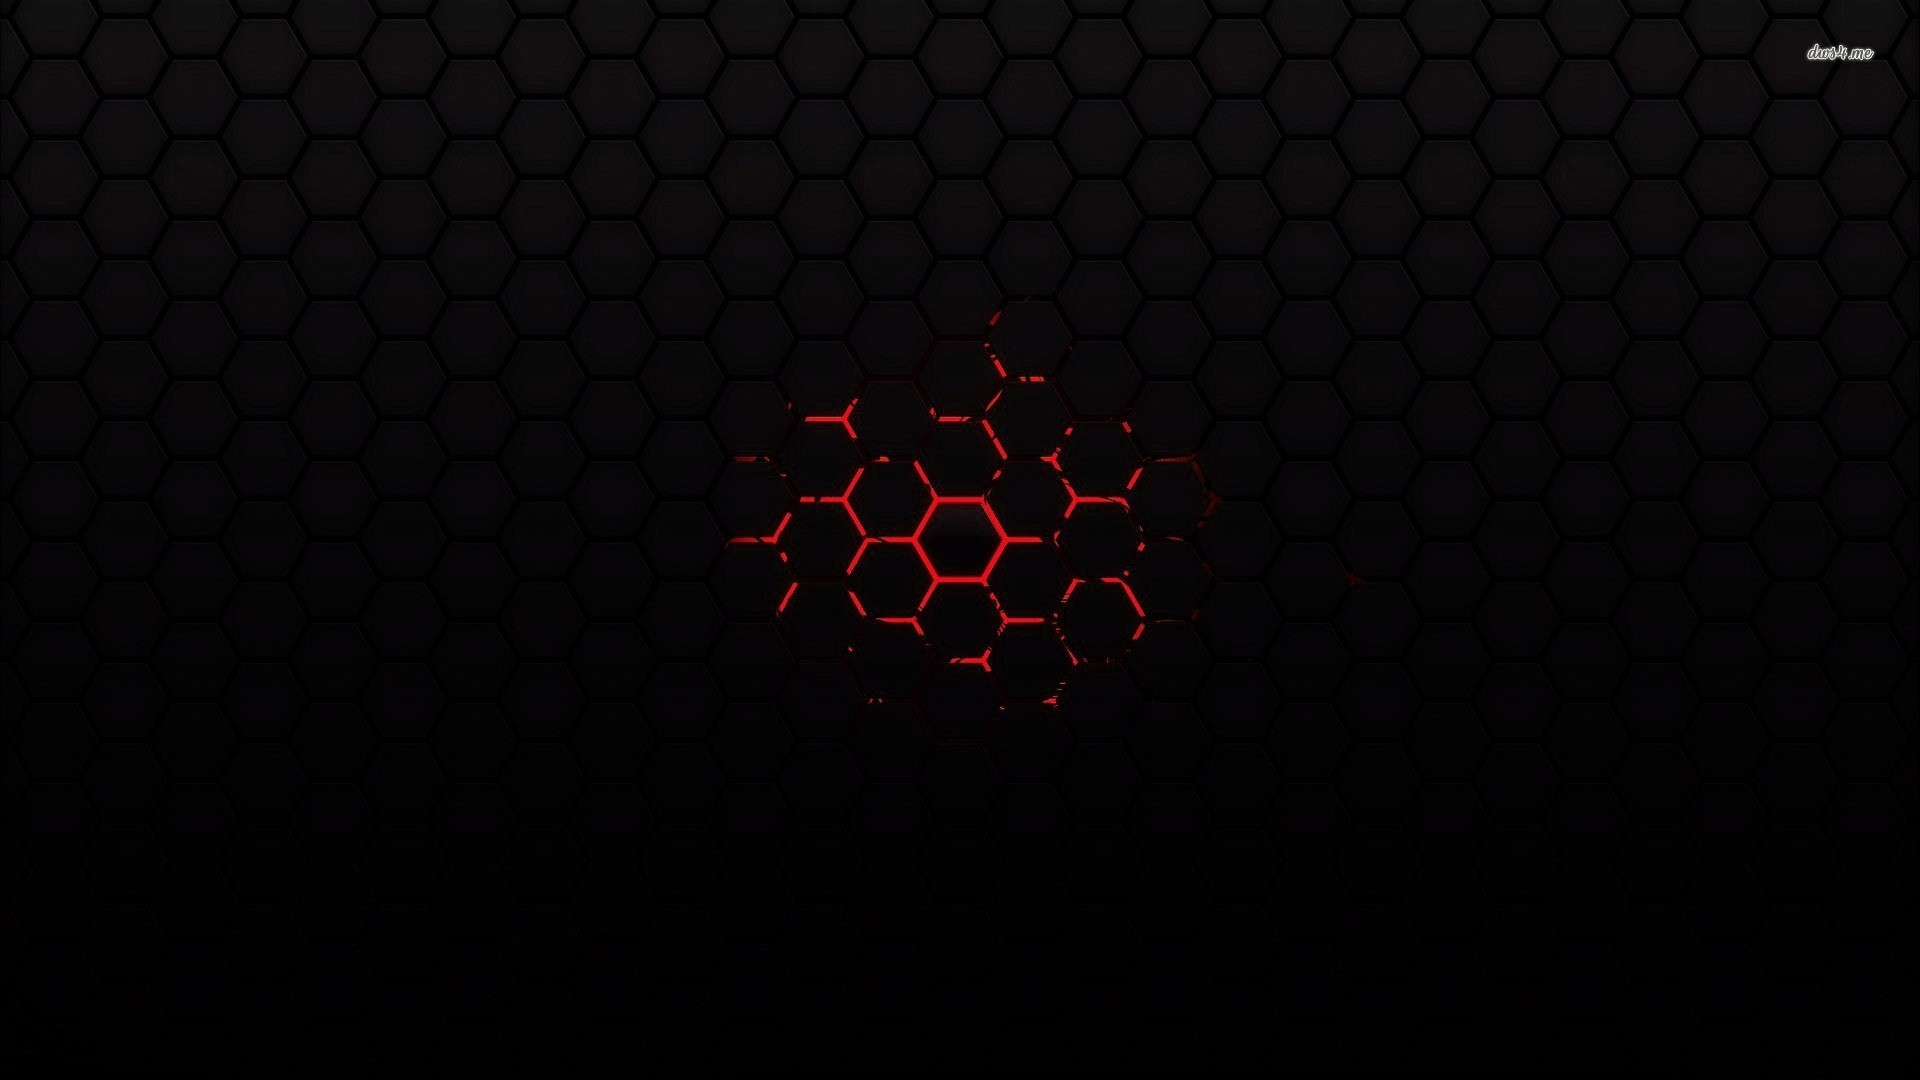 Red on black honeycomb pattern wallpaper 1280×800 Red on black